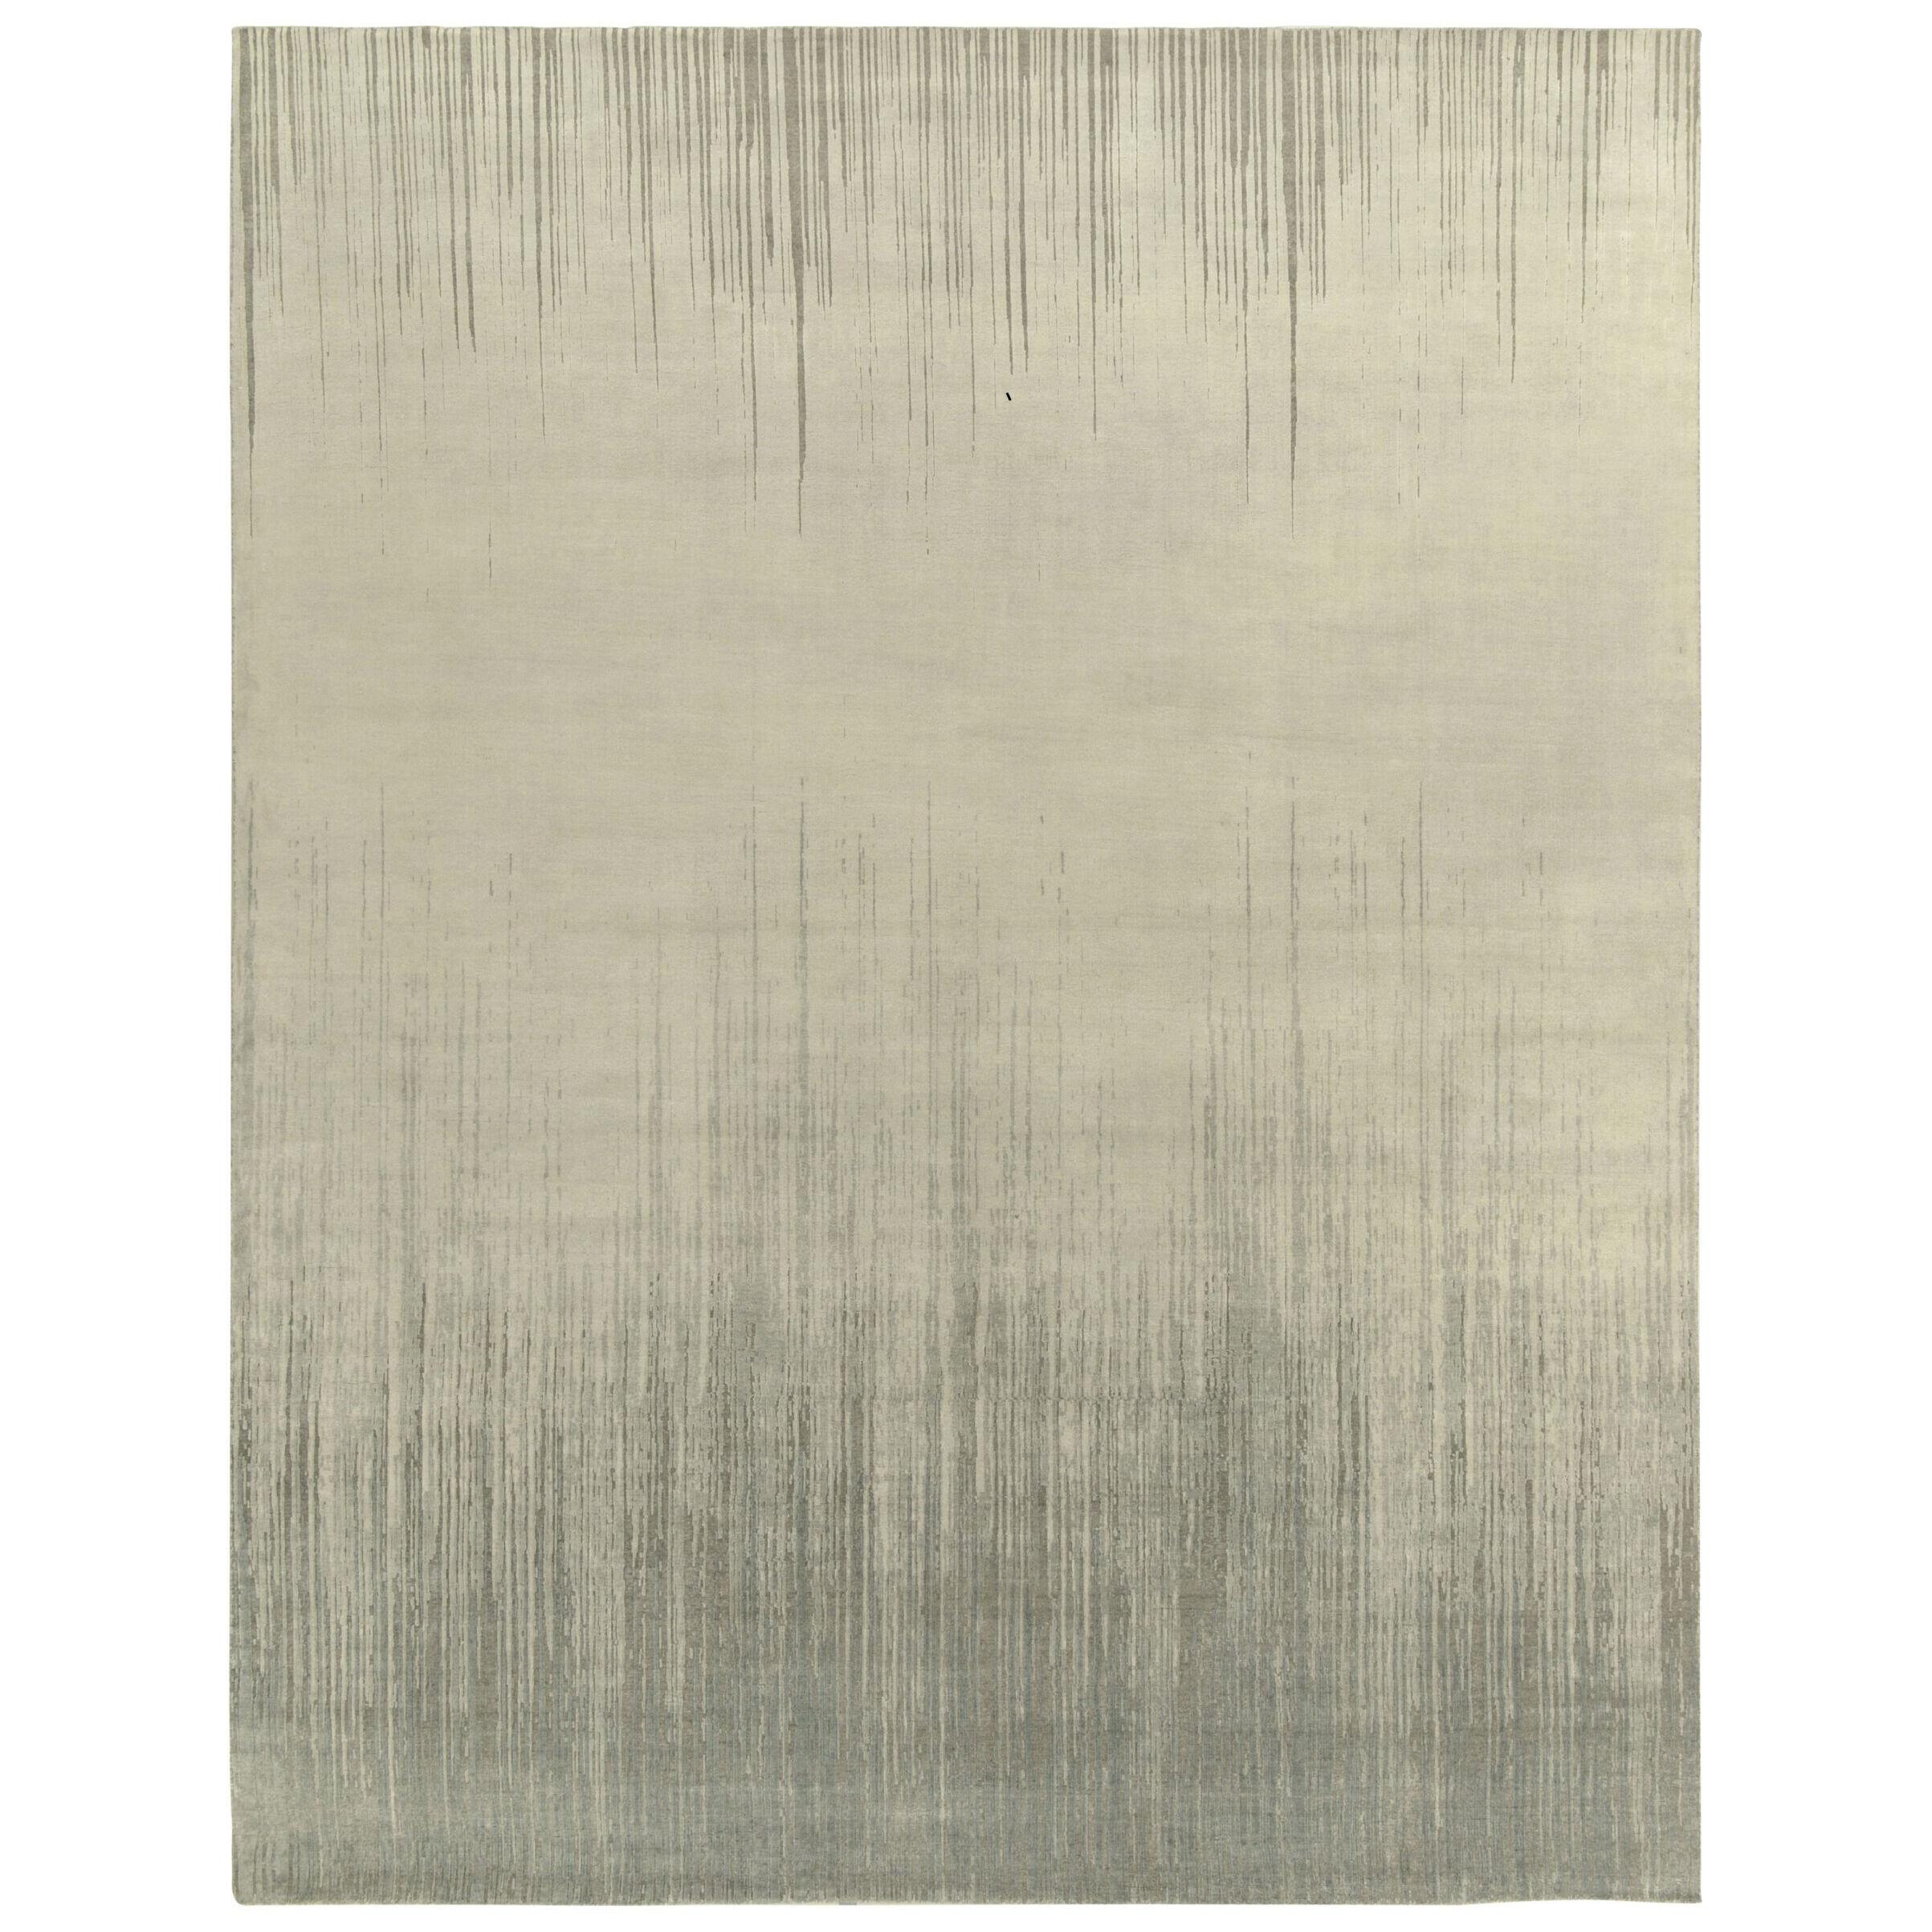 Rug & Kilim’s Modern Abstract Rug in Gray, Beige and Blue Painterly Patterns